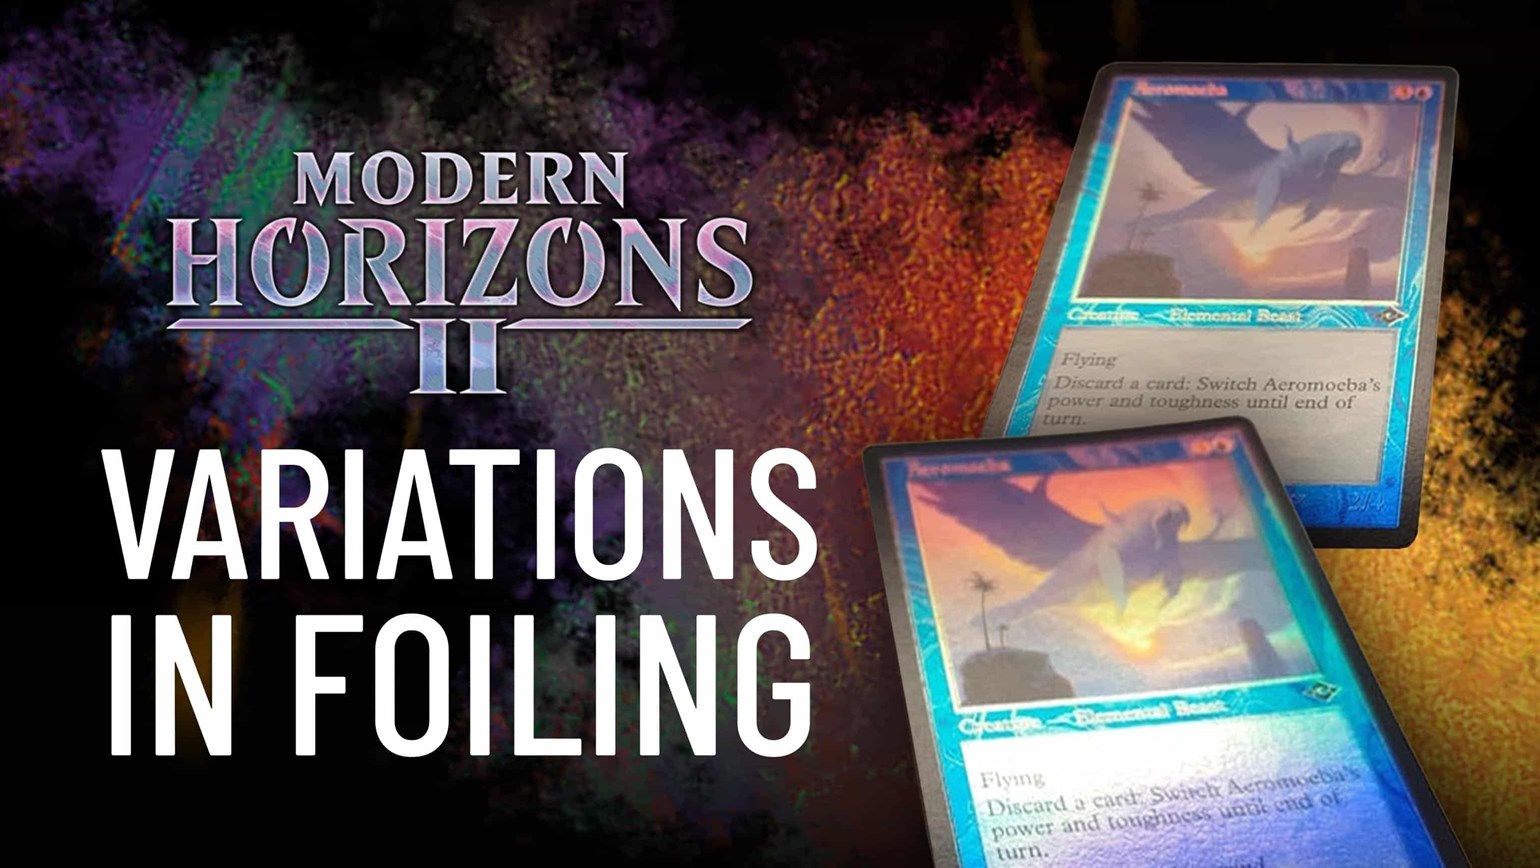 Modern Horizons 2 Variations in Foiling